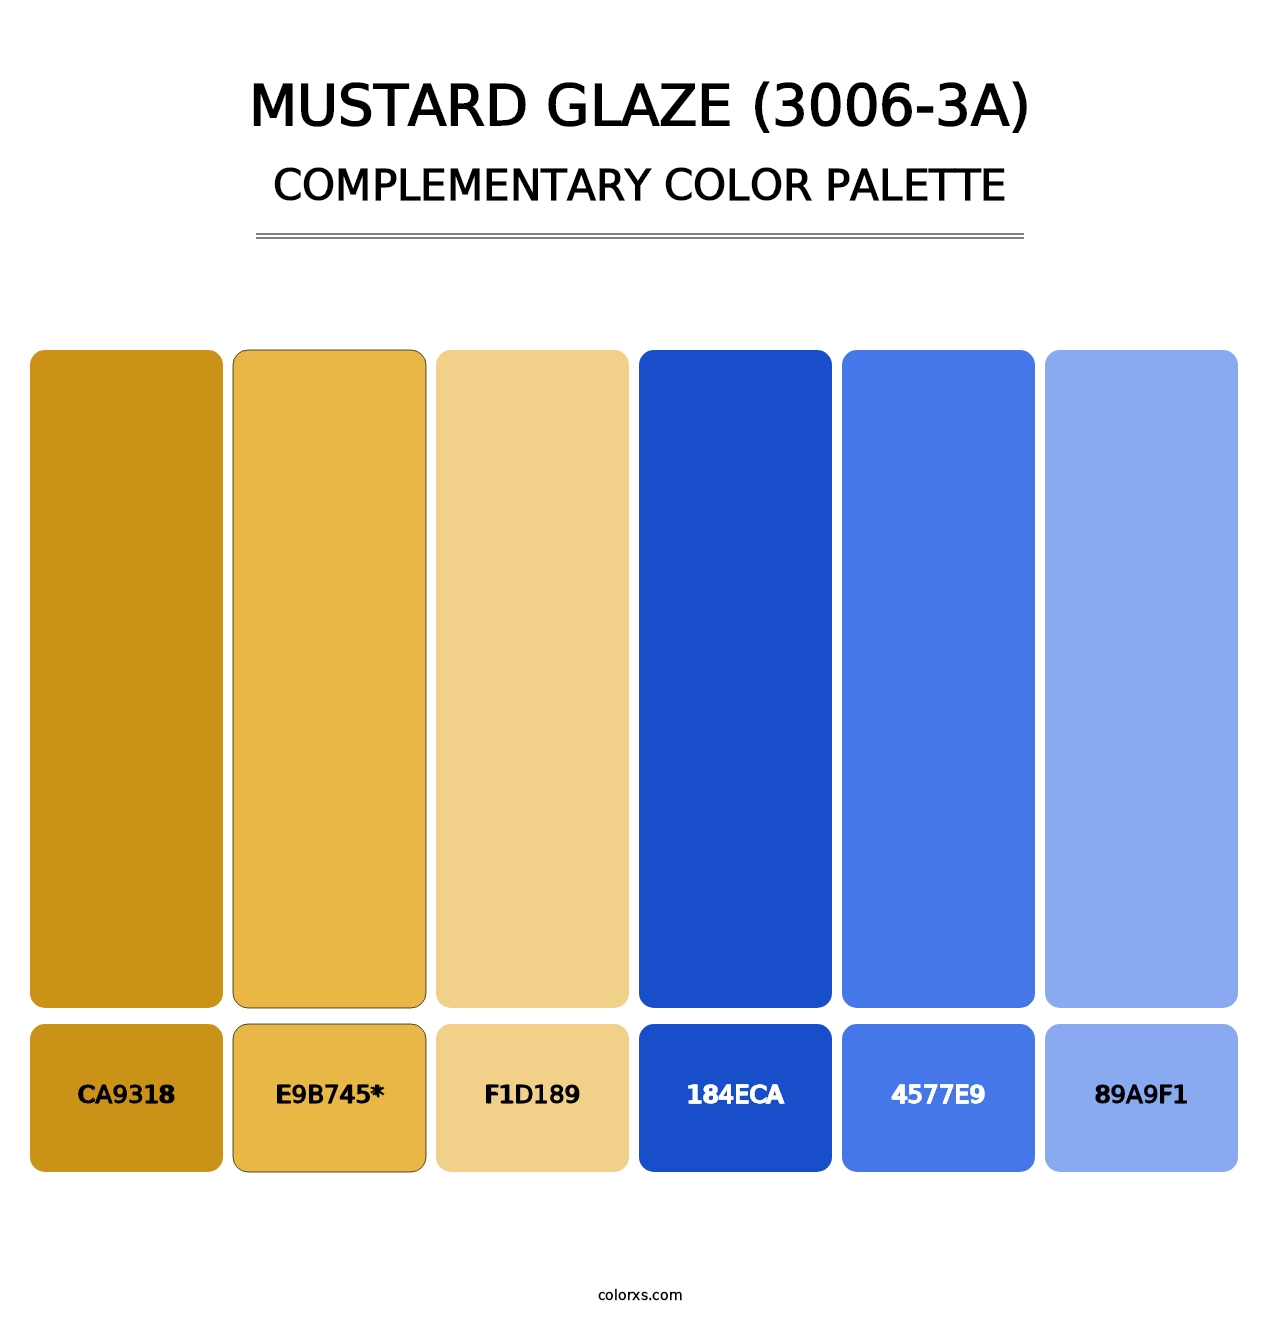 Mustard Glaze (3006-3A) - Complementary Color Palette